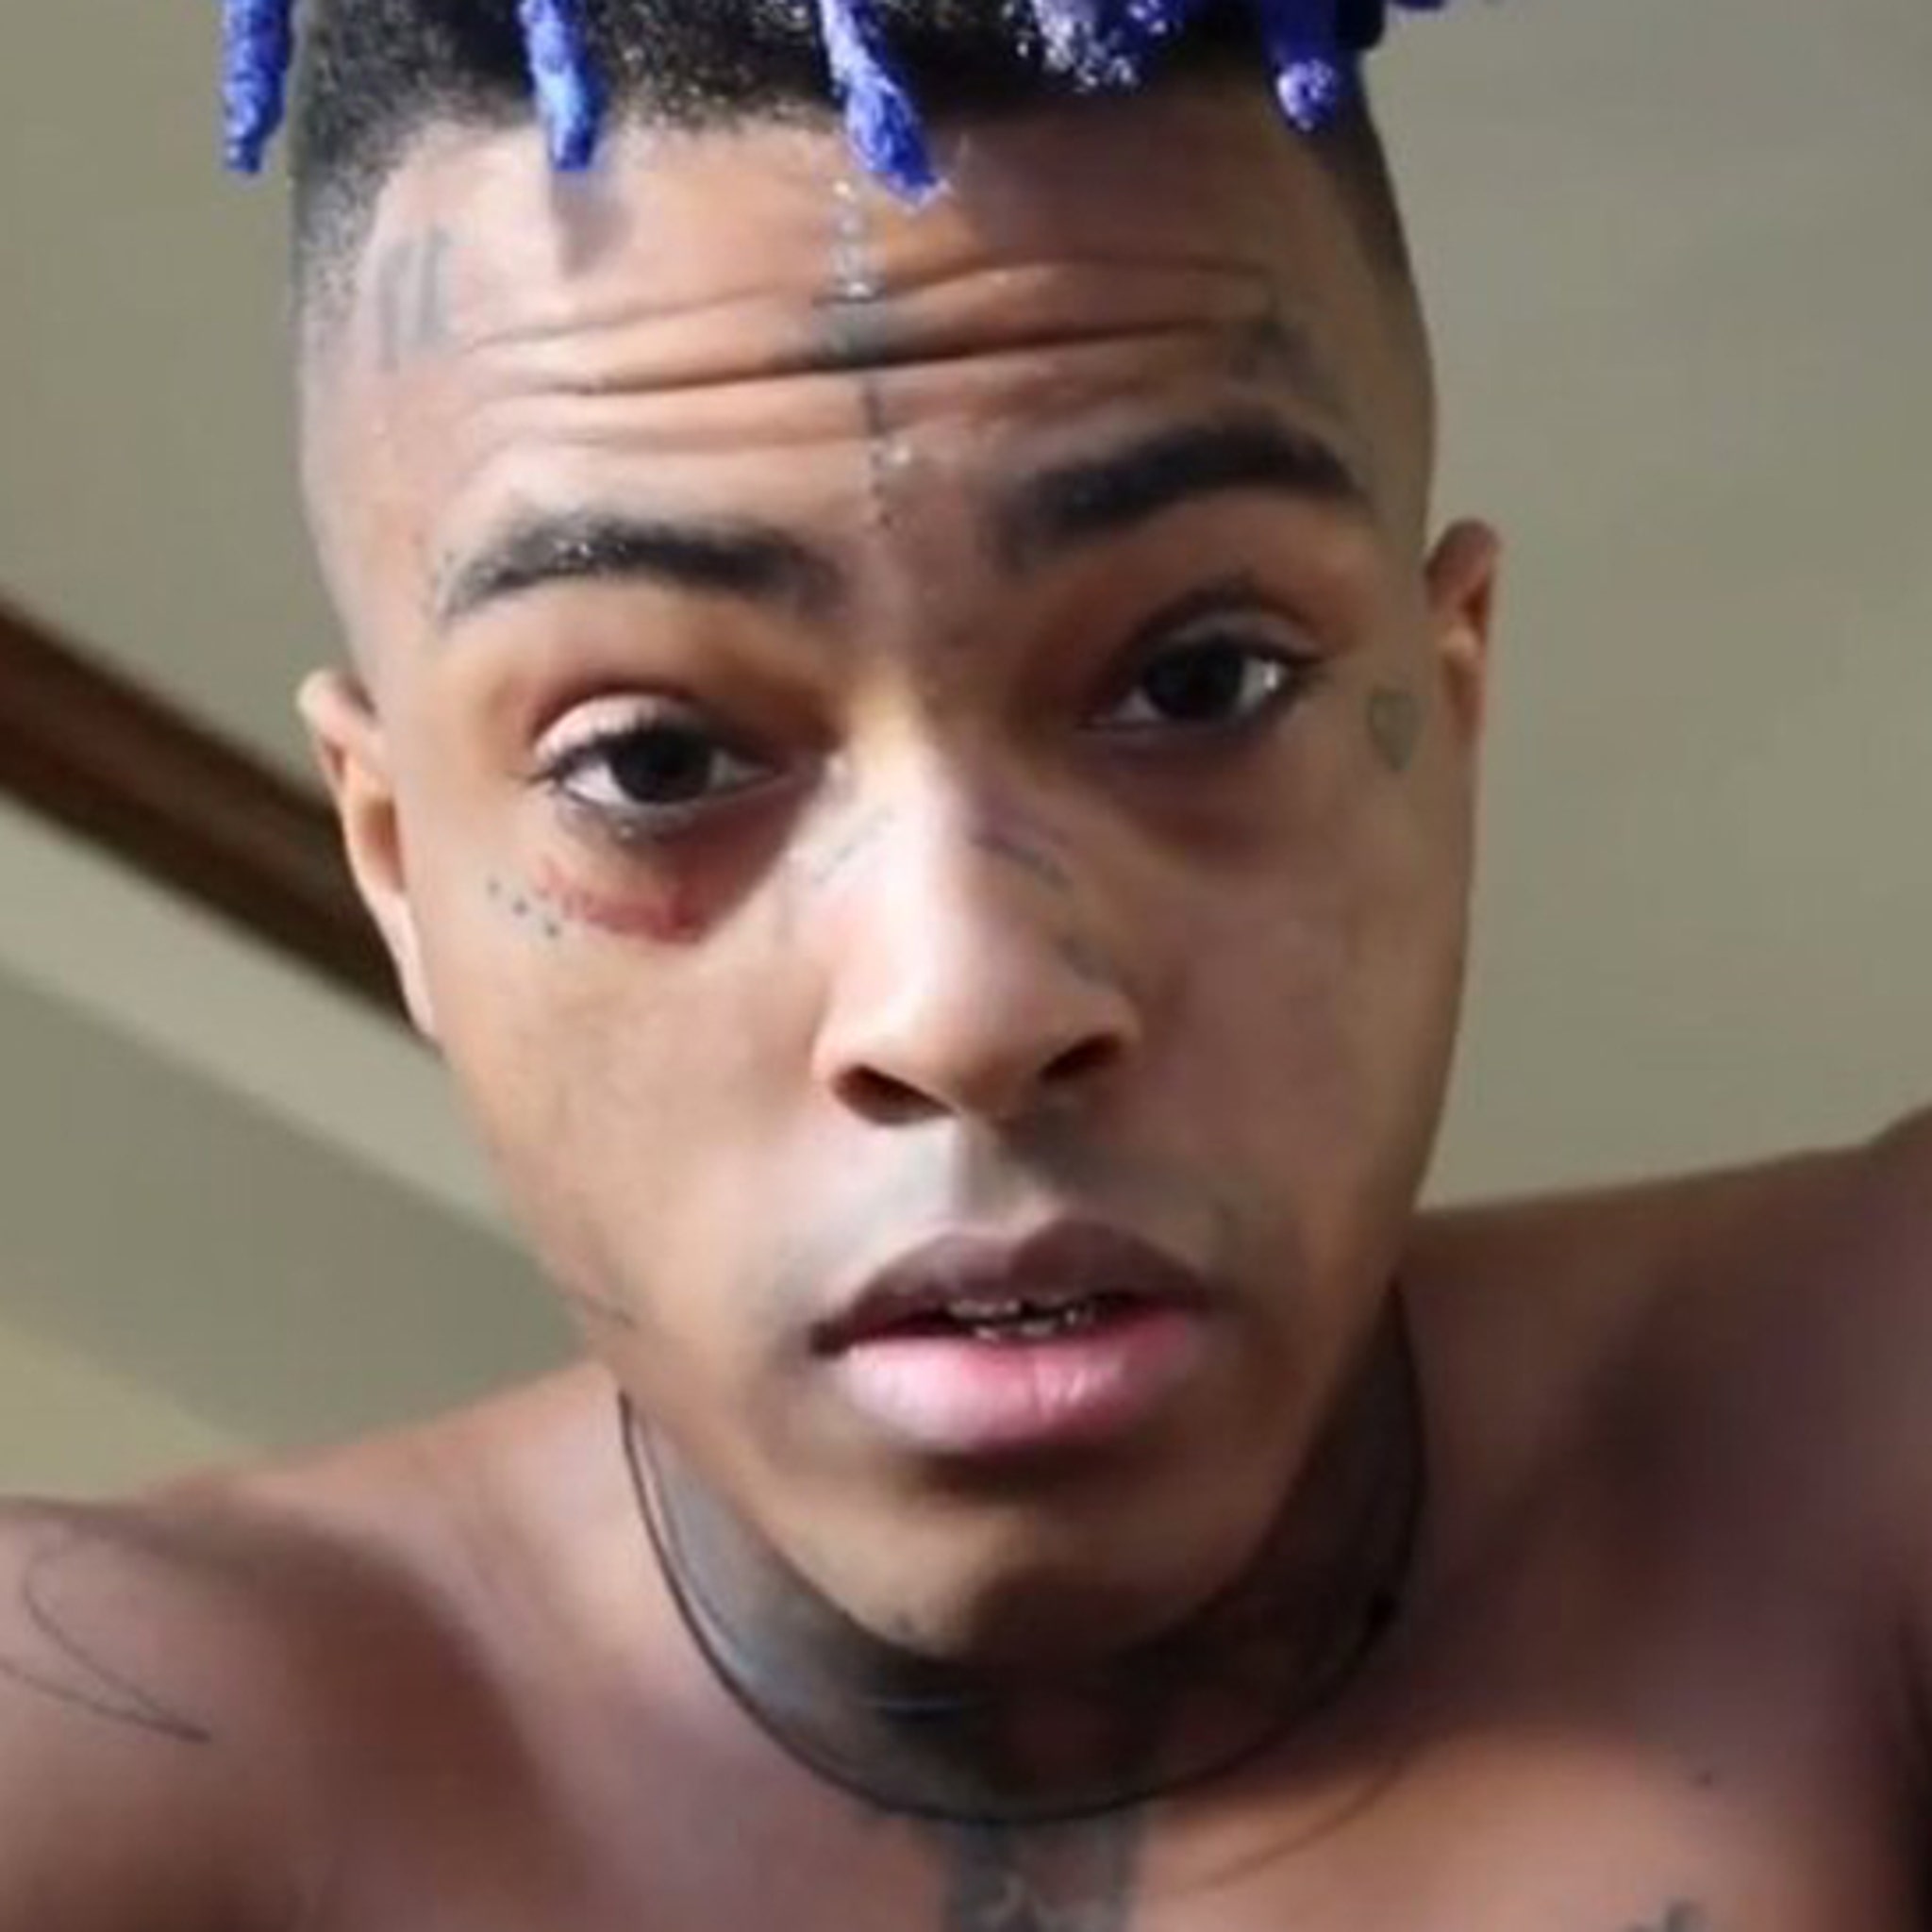 Mom And Son With Force Xxxxx Video - XXXTENTACION's Mom Says 'Look At Me' Doc Humanizes Her Son, Rappers Cosign